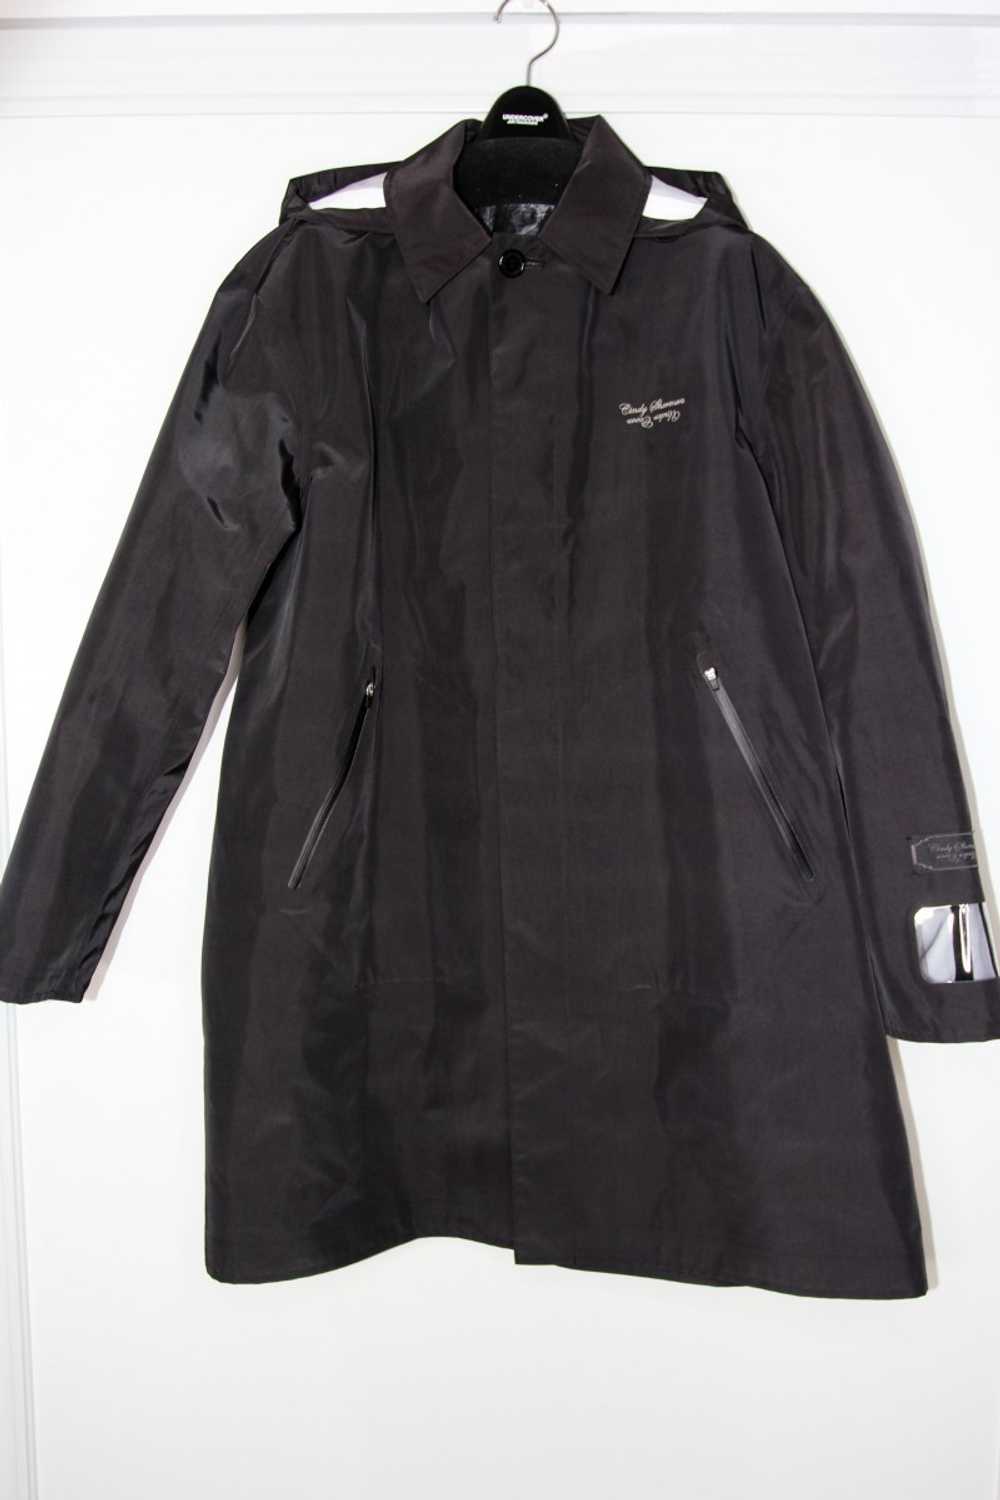 BNWT SS20 UNDERCOVER CINDY SHERMAN PARKA COAT 3 - image 2